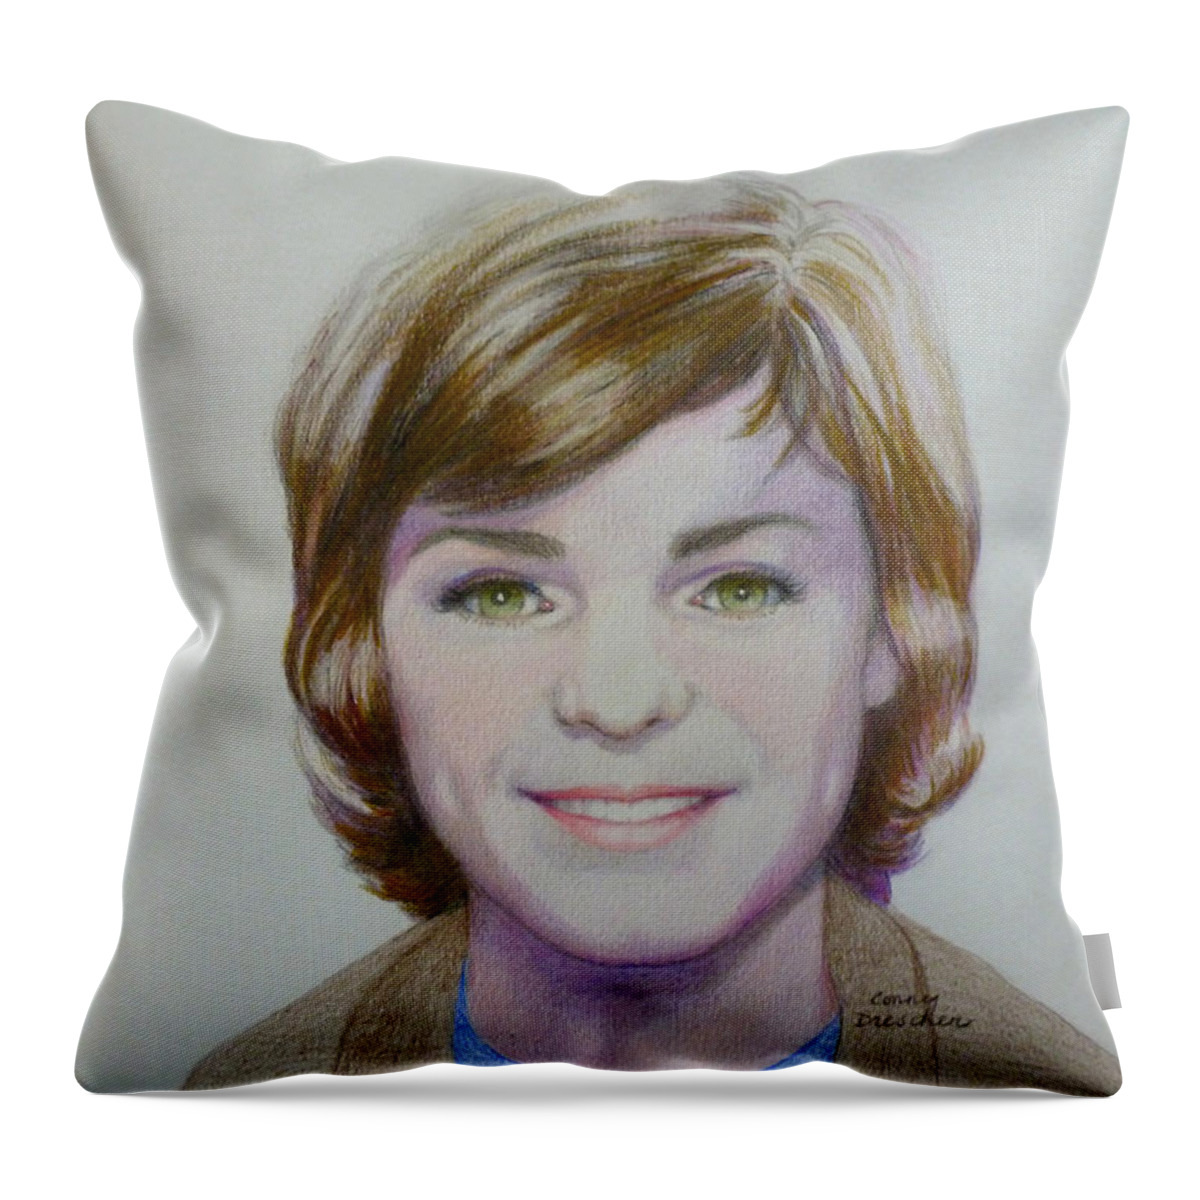 Indoors Throw Pillow featuring the drawing Teenage Girl by Constance DRESCHER